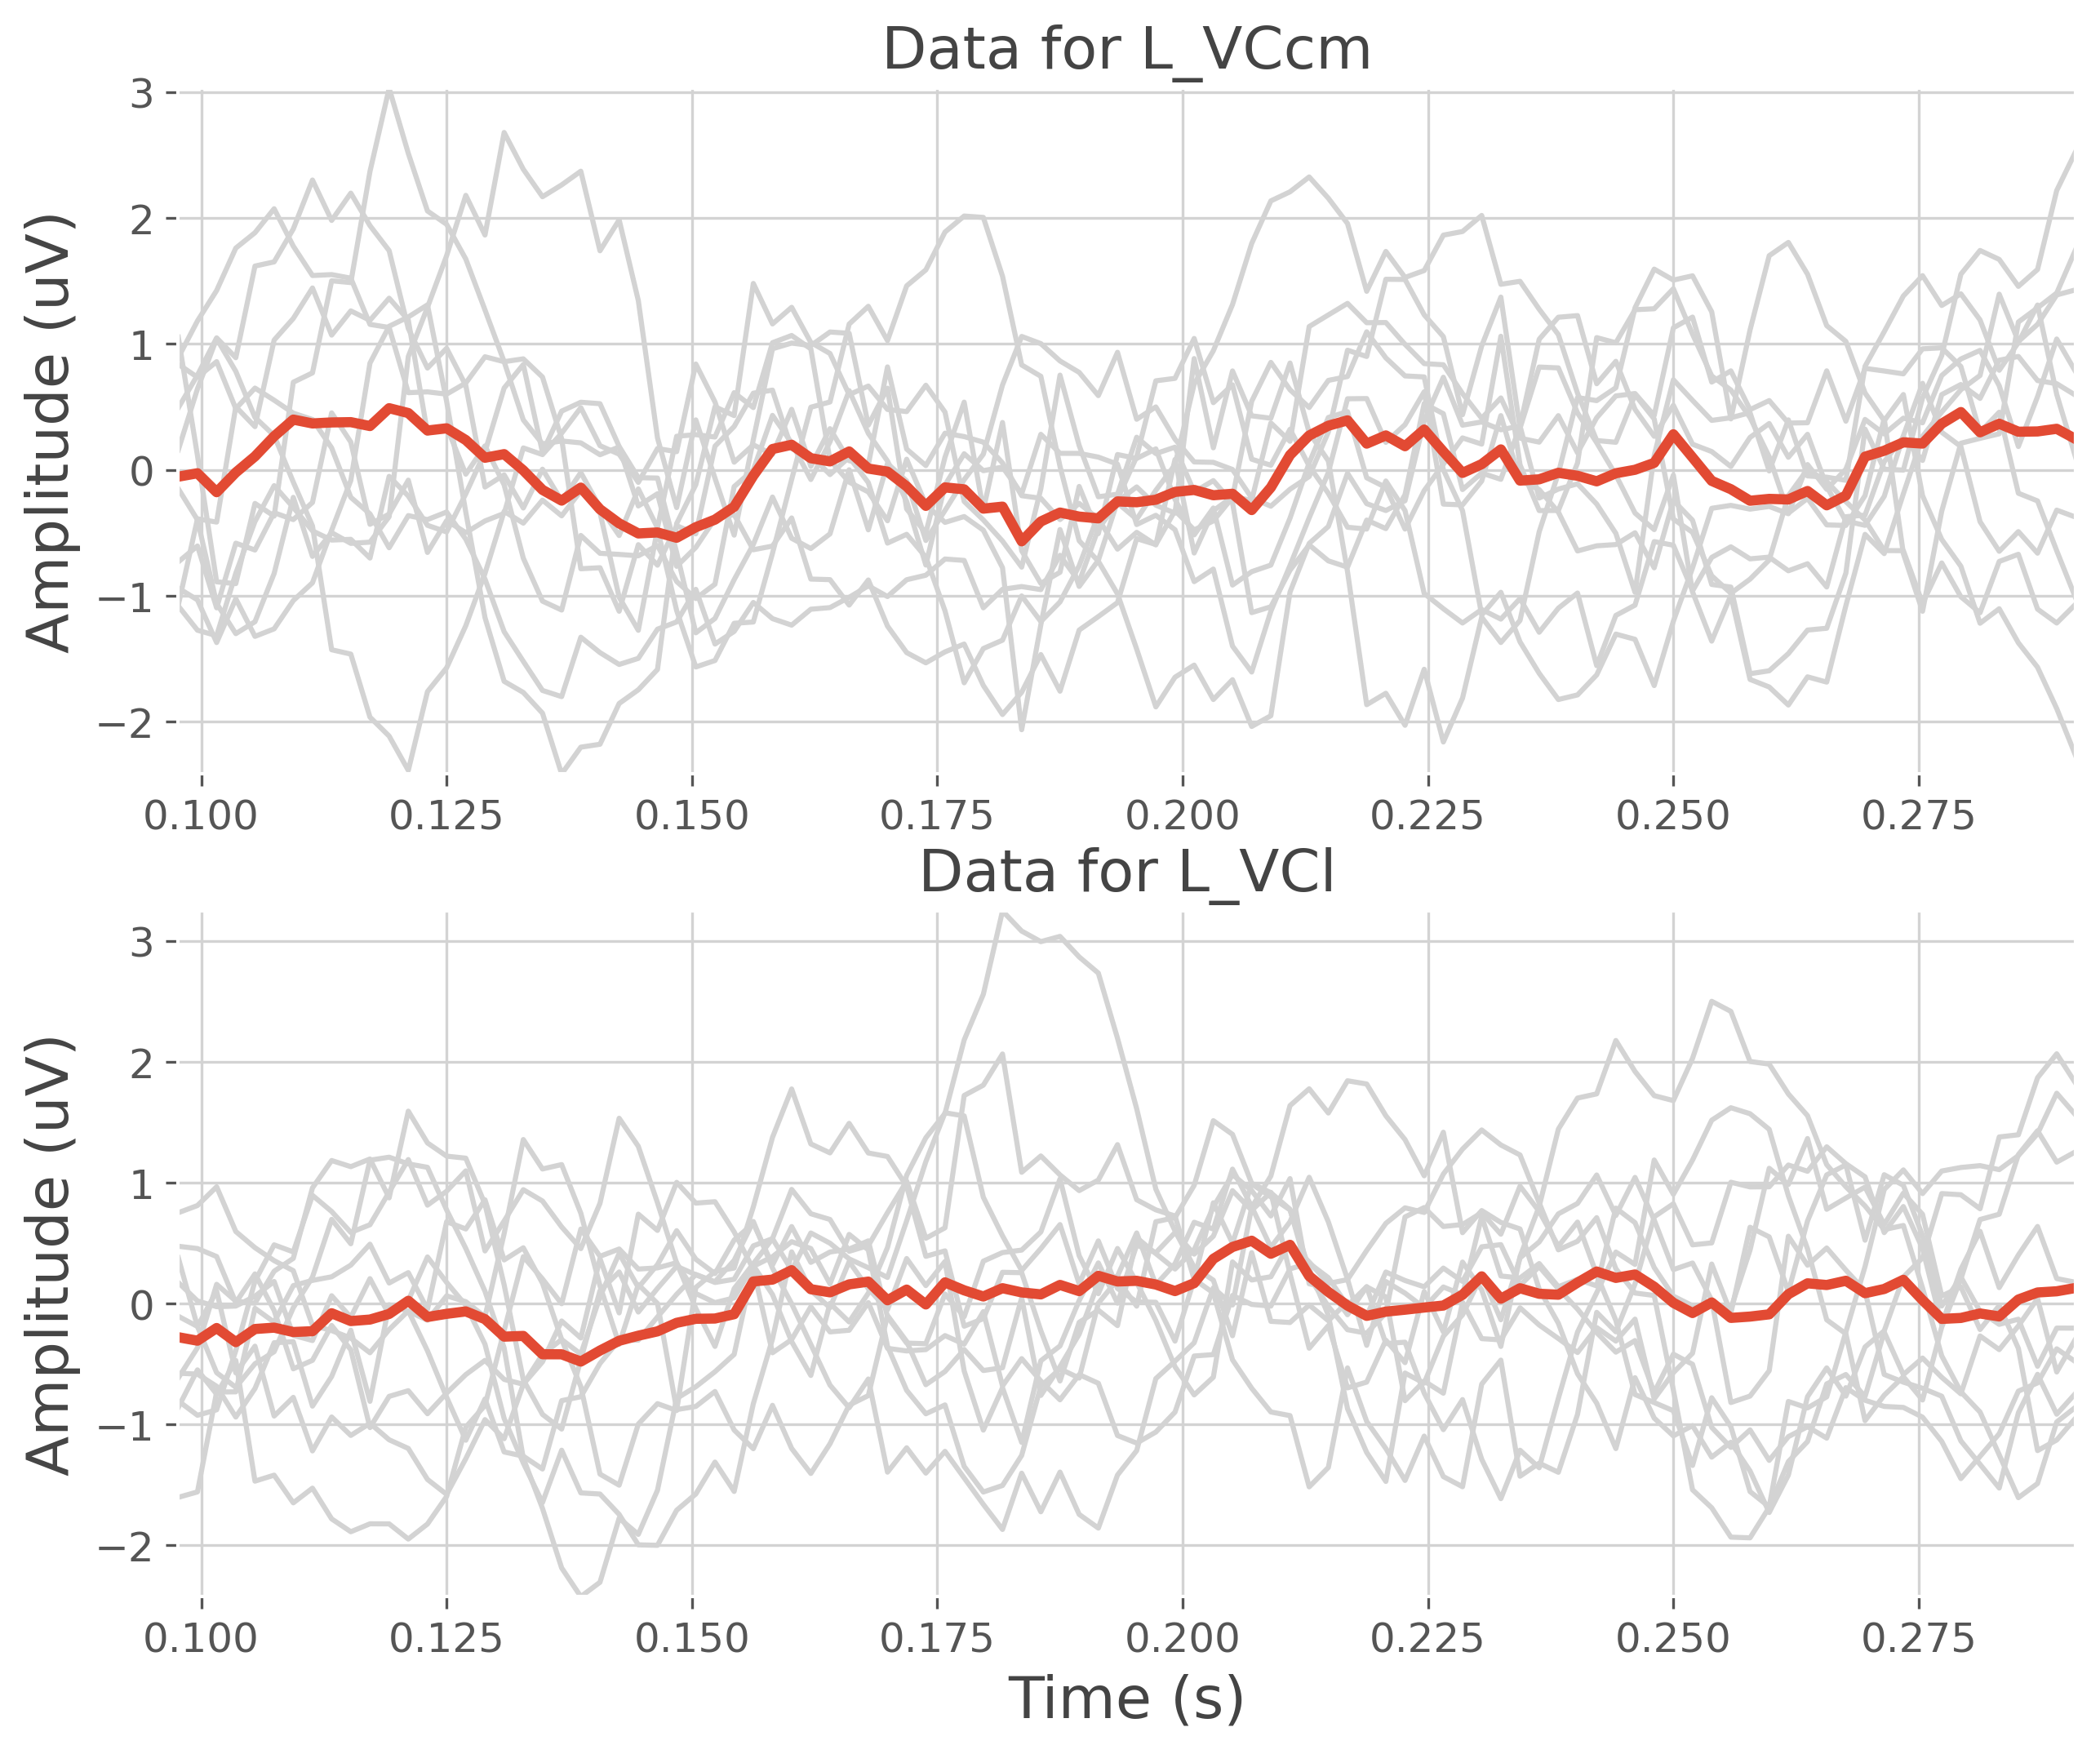 Data for L_VCcm, Data for L_VCl